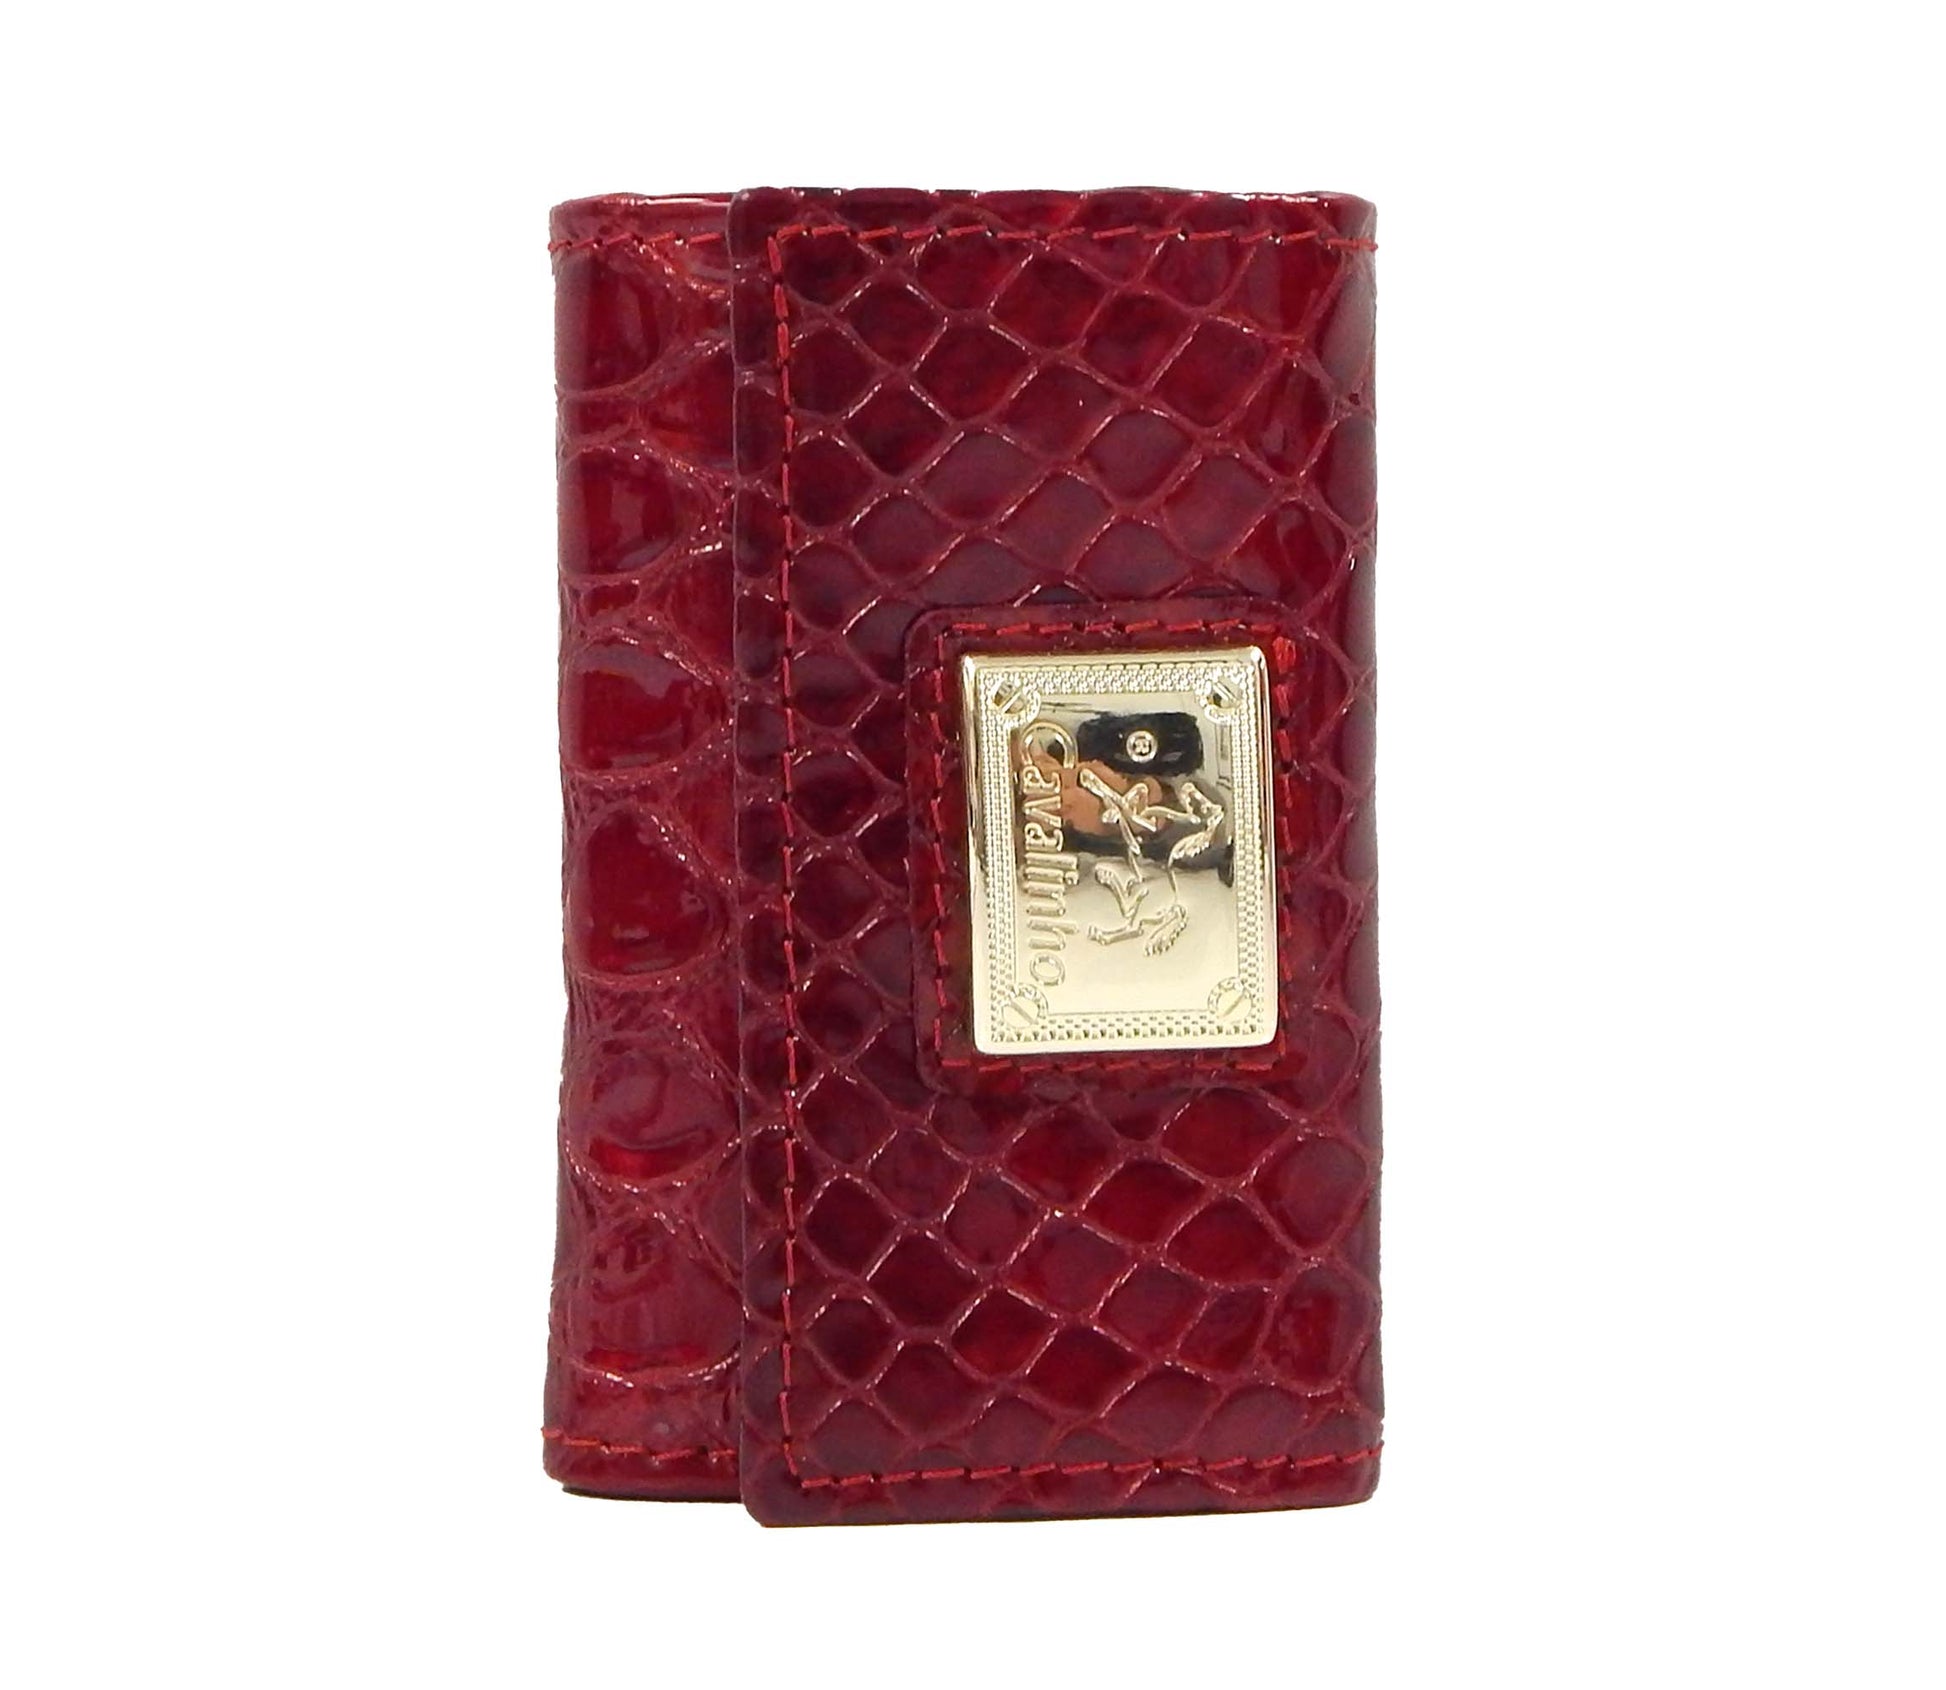 #color_ Red | Cavalinho Gallop Patent Leather Key Holder Wallet - Red - 28170257.04.99_1